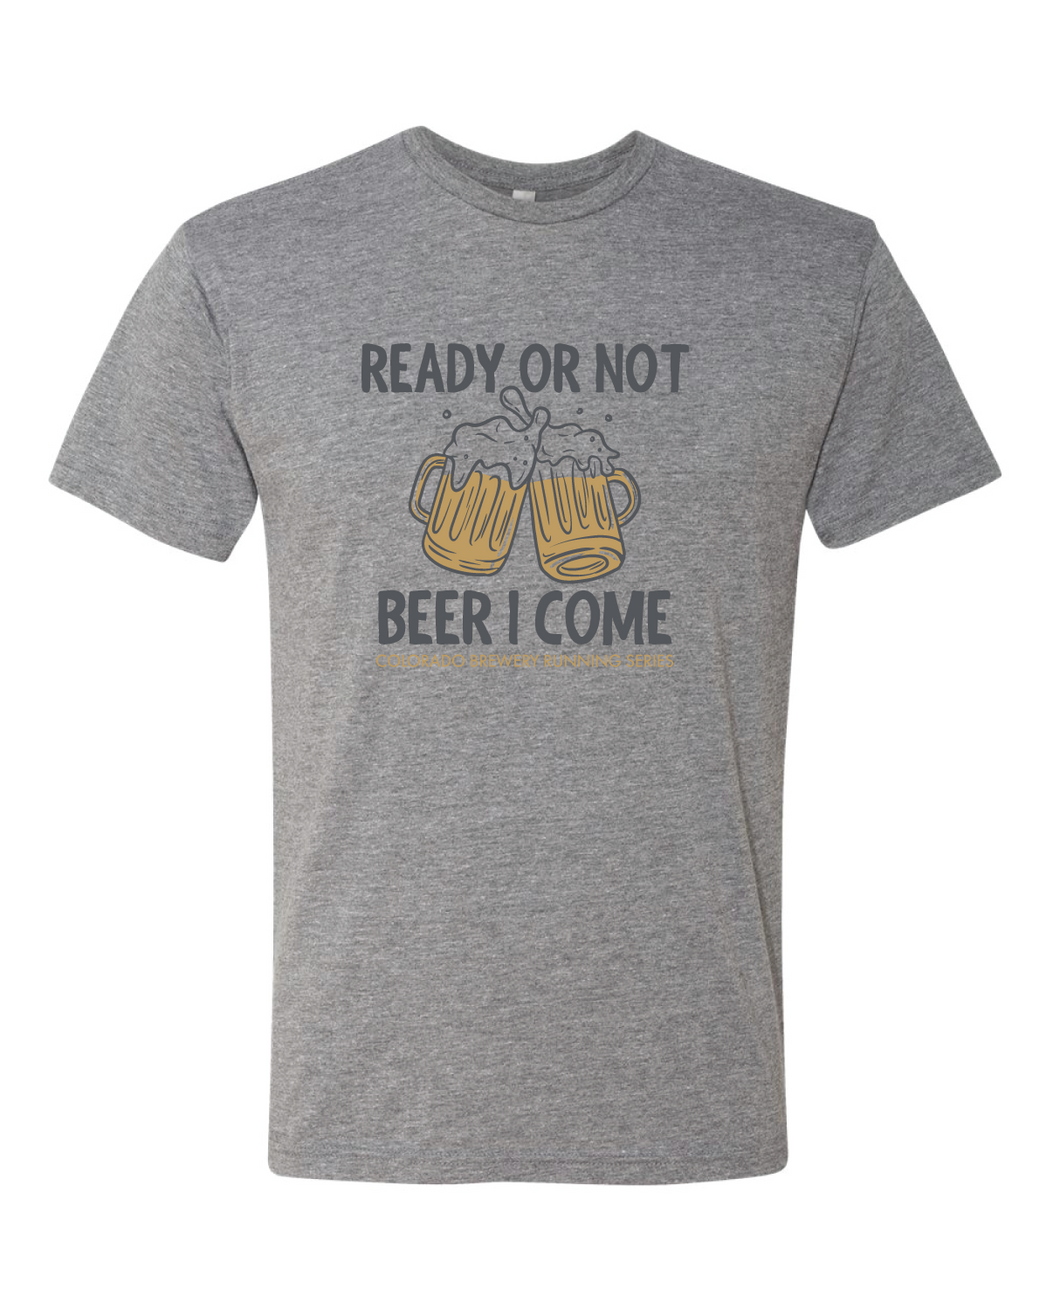 Ready or Not - T-Shirt - Premium Heather